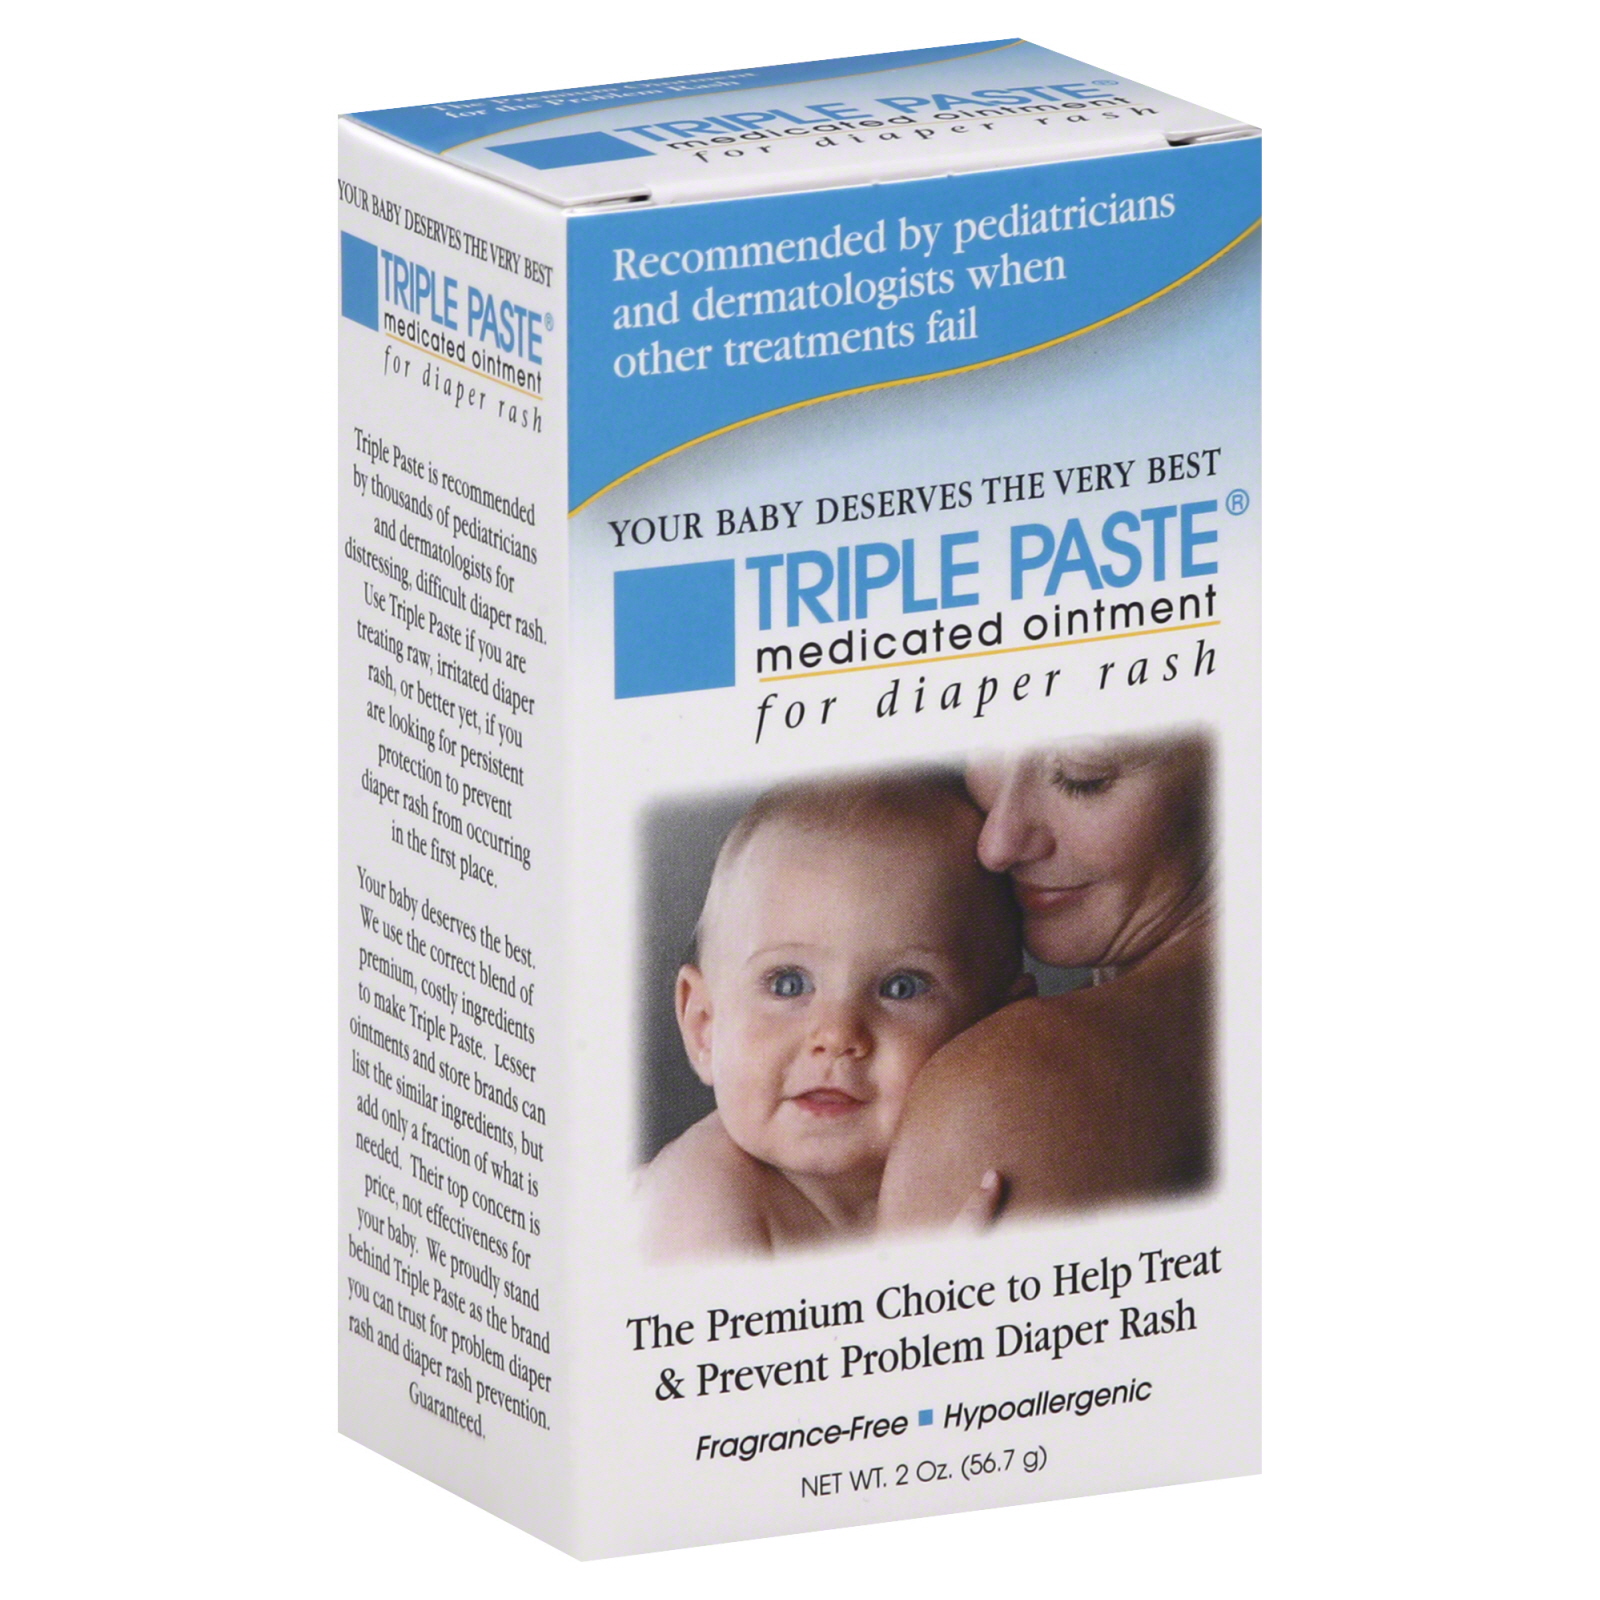 Triple Paste Ointment, Medicated, for Diaper Rash, 2 oz (56.7 g)